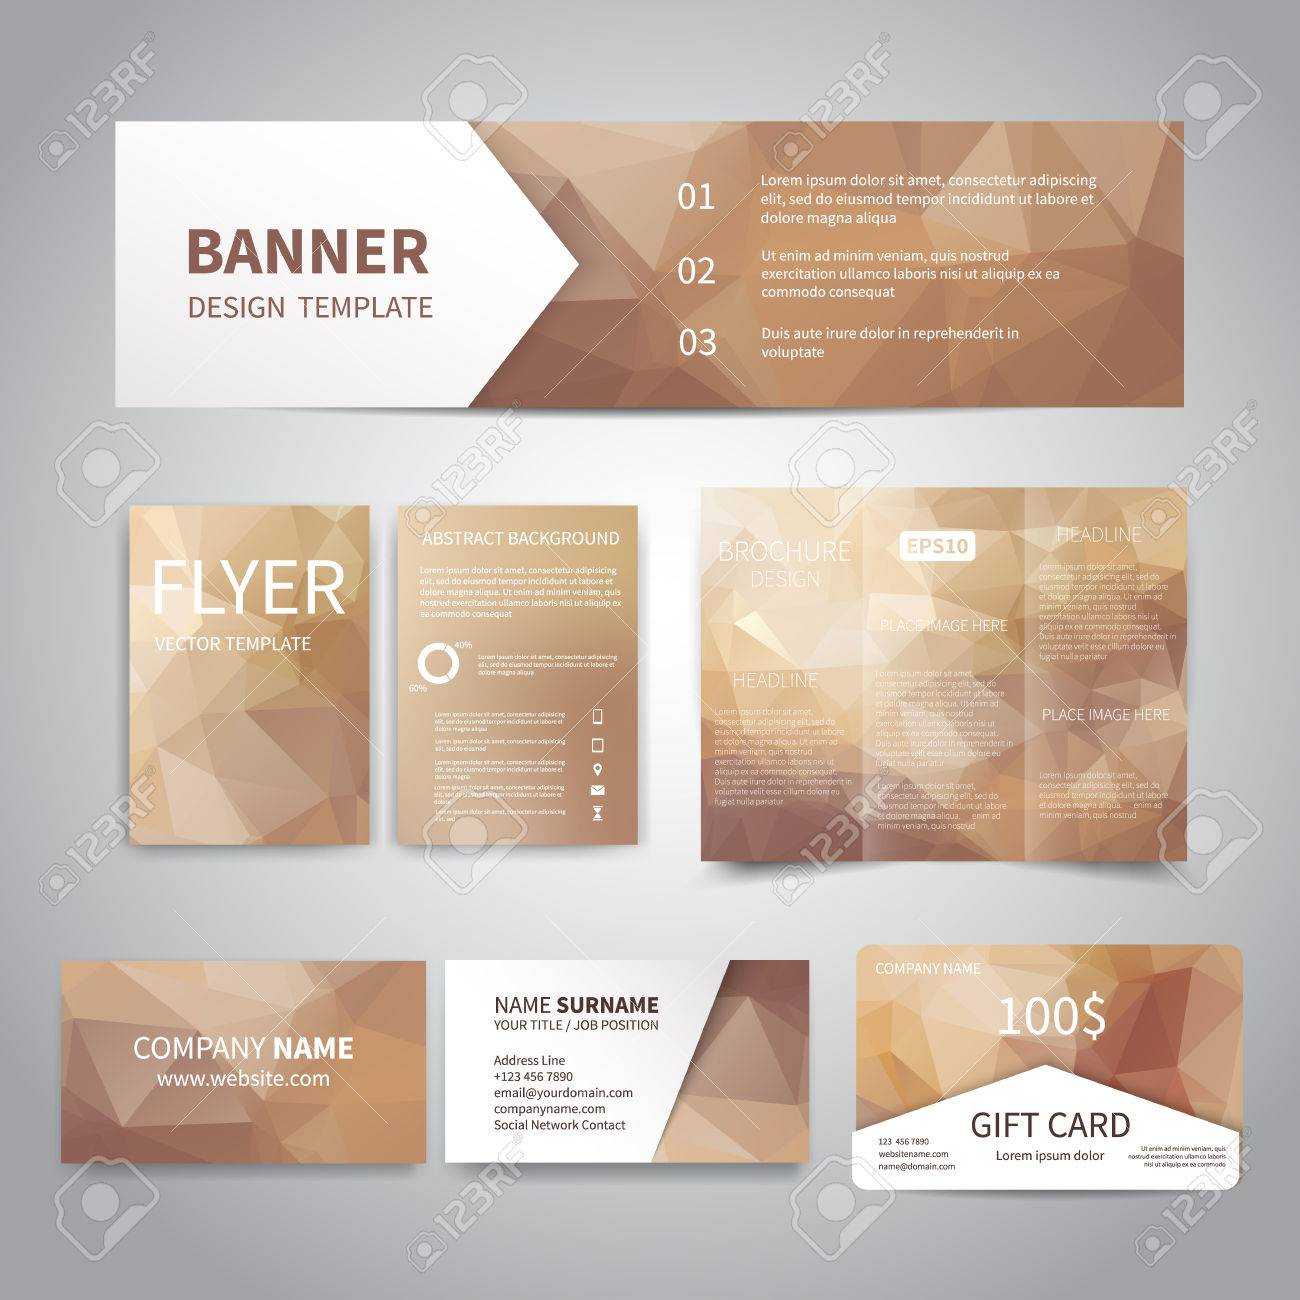 Banner, Flyers, Brochure, Business Cards, Gift Card Design Templates Set  With Geometric Triangular Beige Background. Corporate Identity Set, Pertaining To Advertising Cards Templates